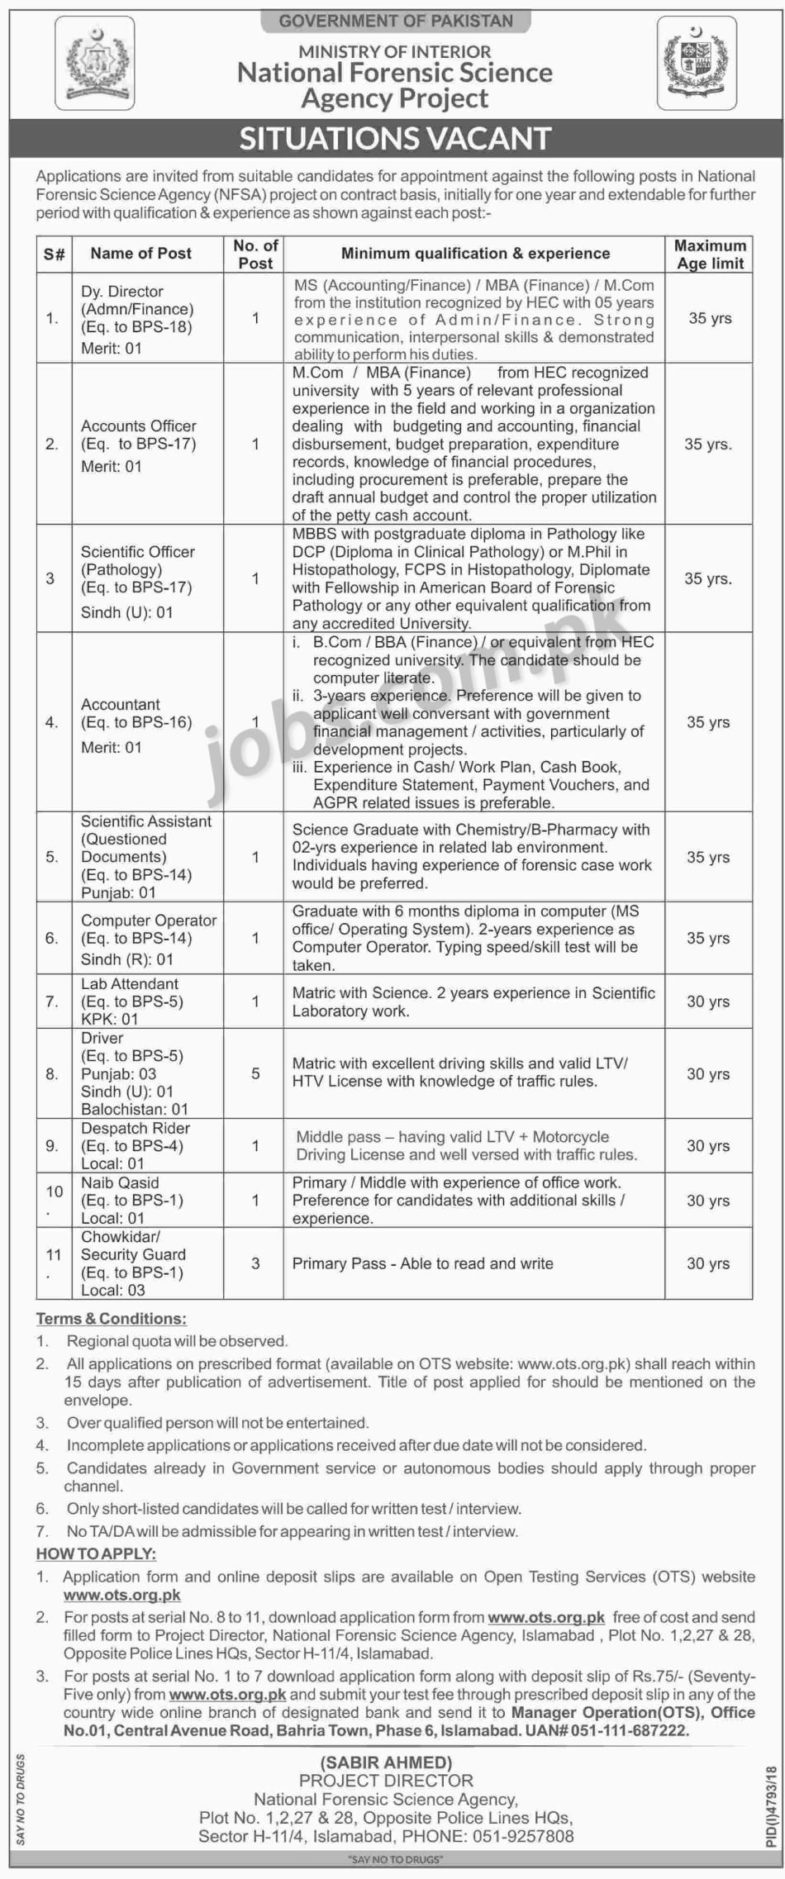 National Forensic Science Agency (NFSA) Jobs 2019 for 17+ Scientific Officer/Assistant, Accounts, Admin, Computer Operator & Support Staff